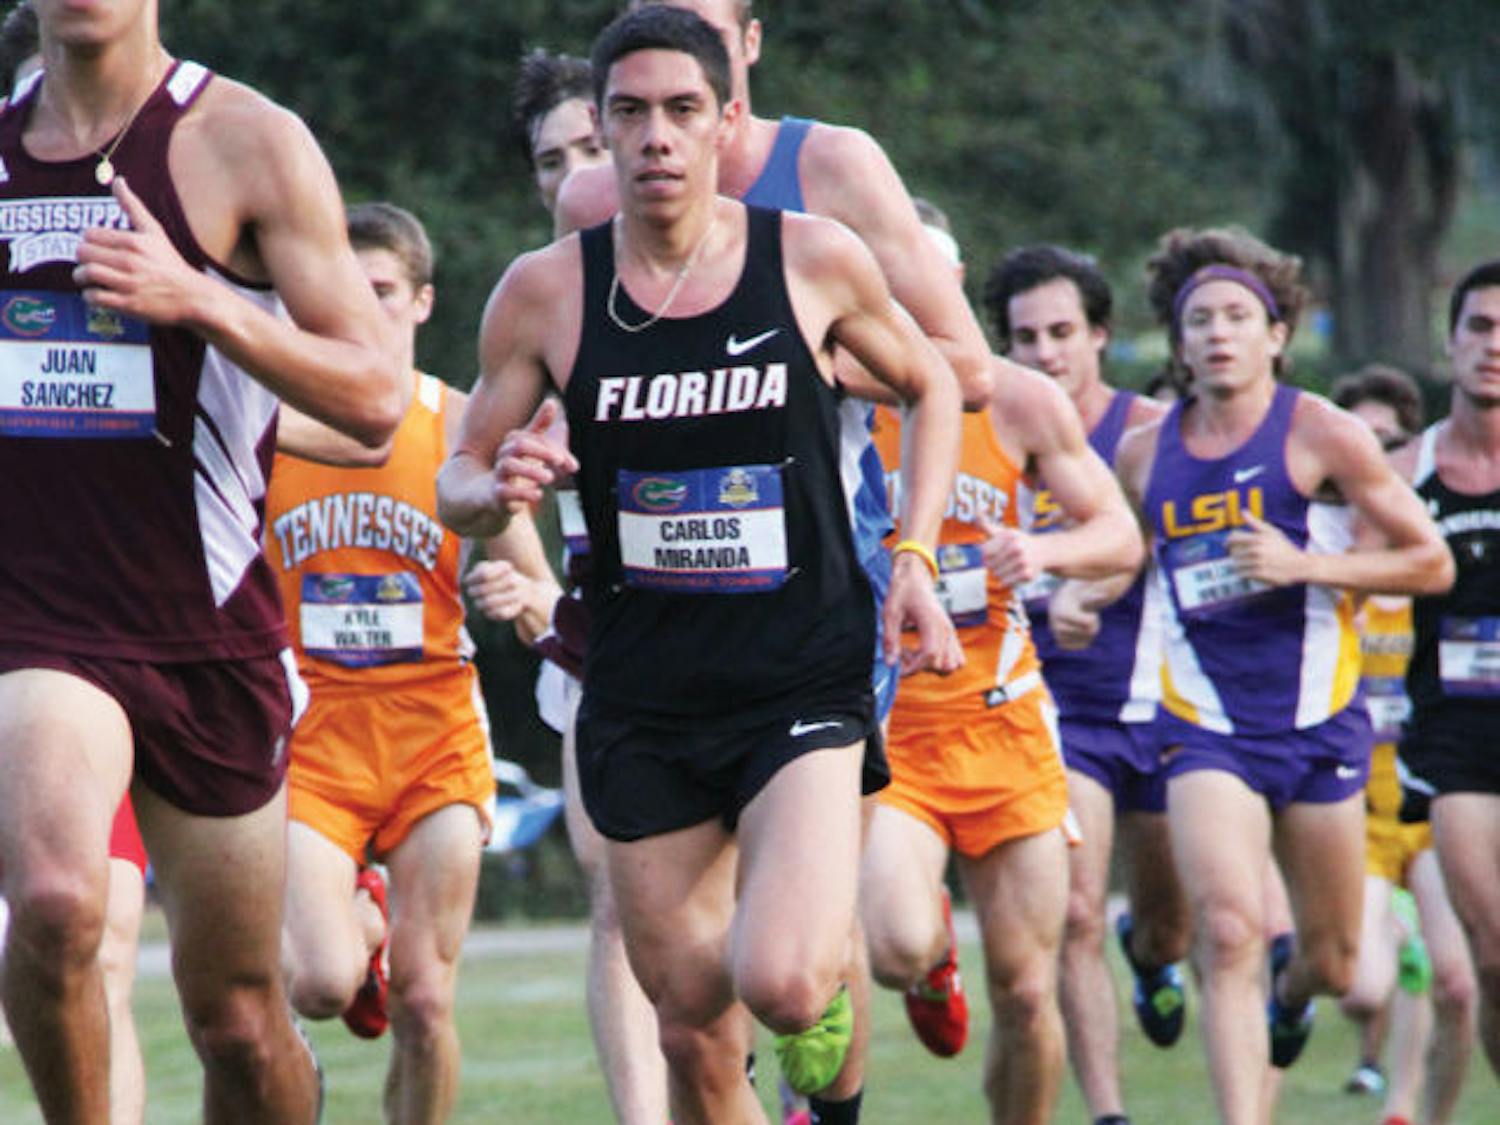 Carlos Miranda races during the Southeastern Conference Championships on Nov. 1 in Gainesville. Miranda placed 29th, as the Gators finished second in the meet.